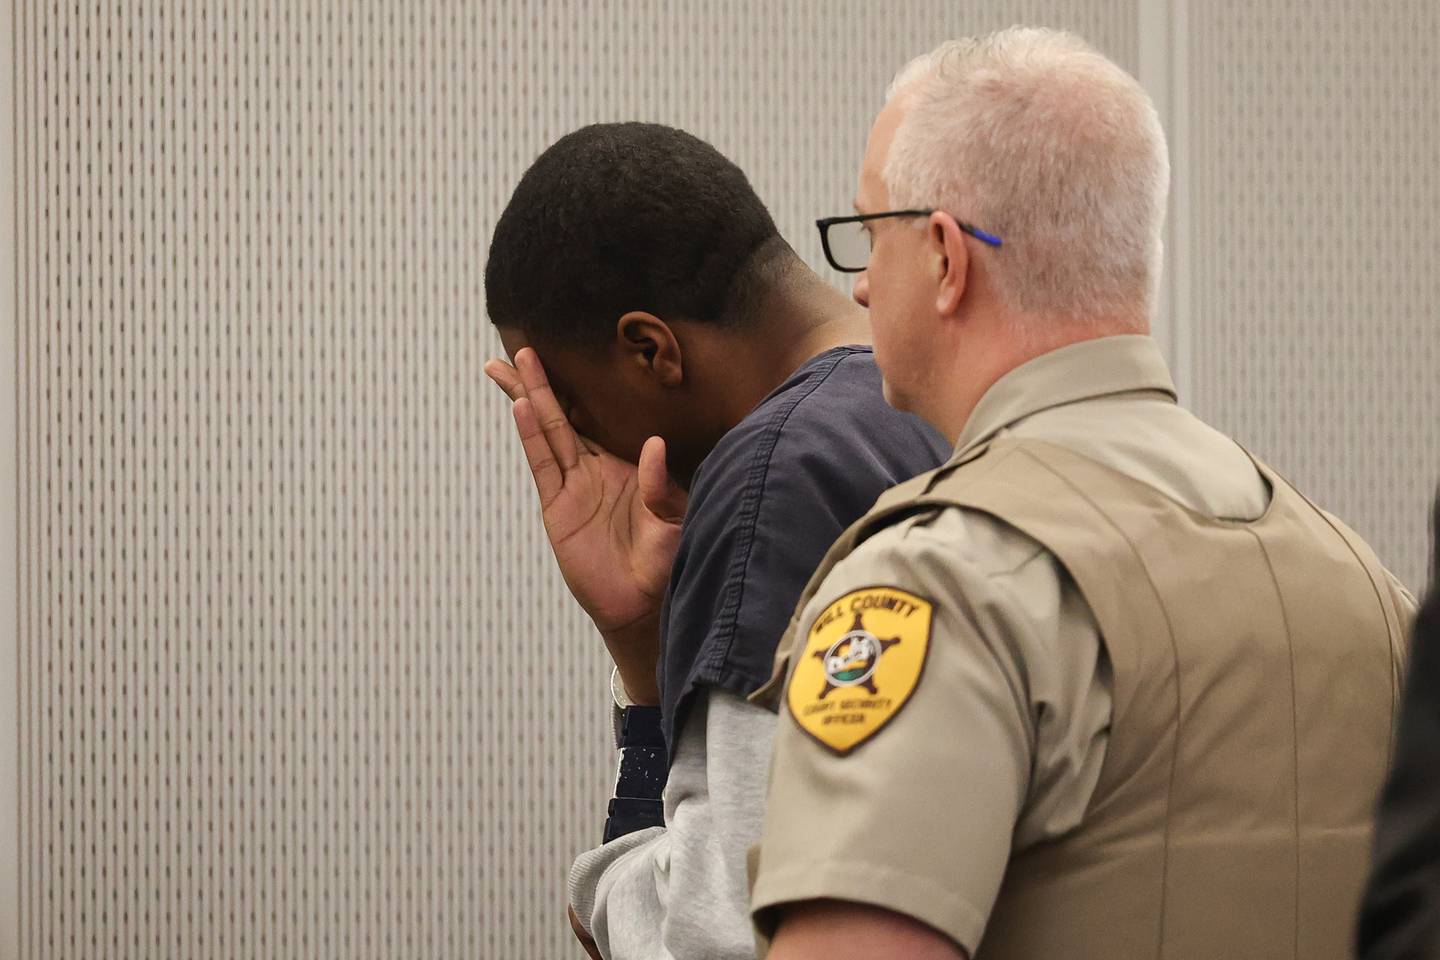 Byrion Montgomery, 17, of Bolingbrook, hides his emotional break down as he leaves his hearing at the Will County Courthouse on Thursday, March 30, 2023 in Joliet. Montgomery is accused of the murders of Cartez Daniels, 40, Samiya Shelton-Tillman, 17, and Sanai Daniels, 9, at a residence in the 100 block of Lee Lane in Bolingbrook, as well as attempted first-degree murder of Tania Stewart.